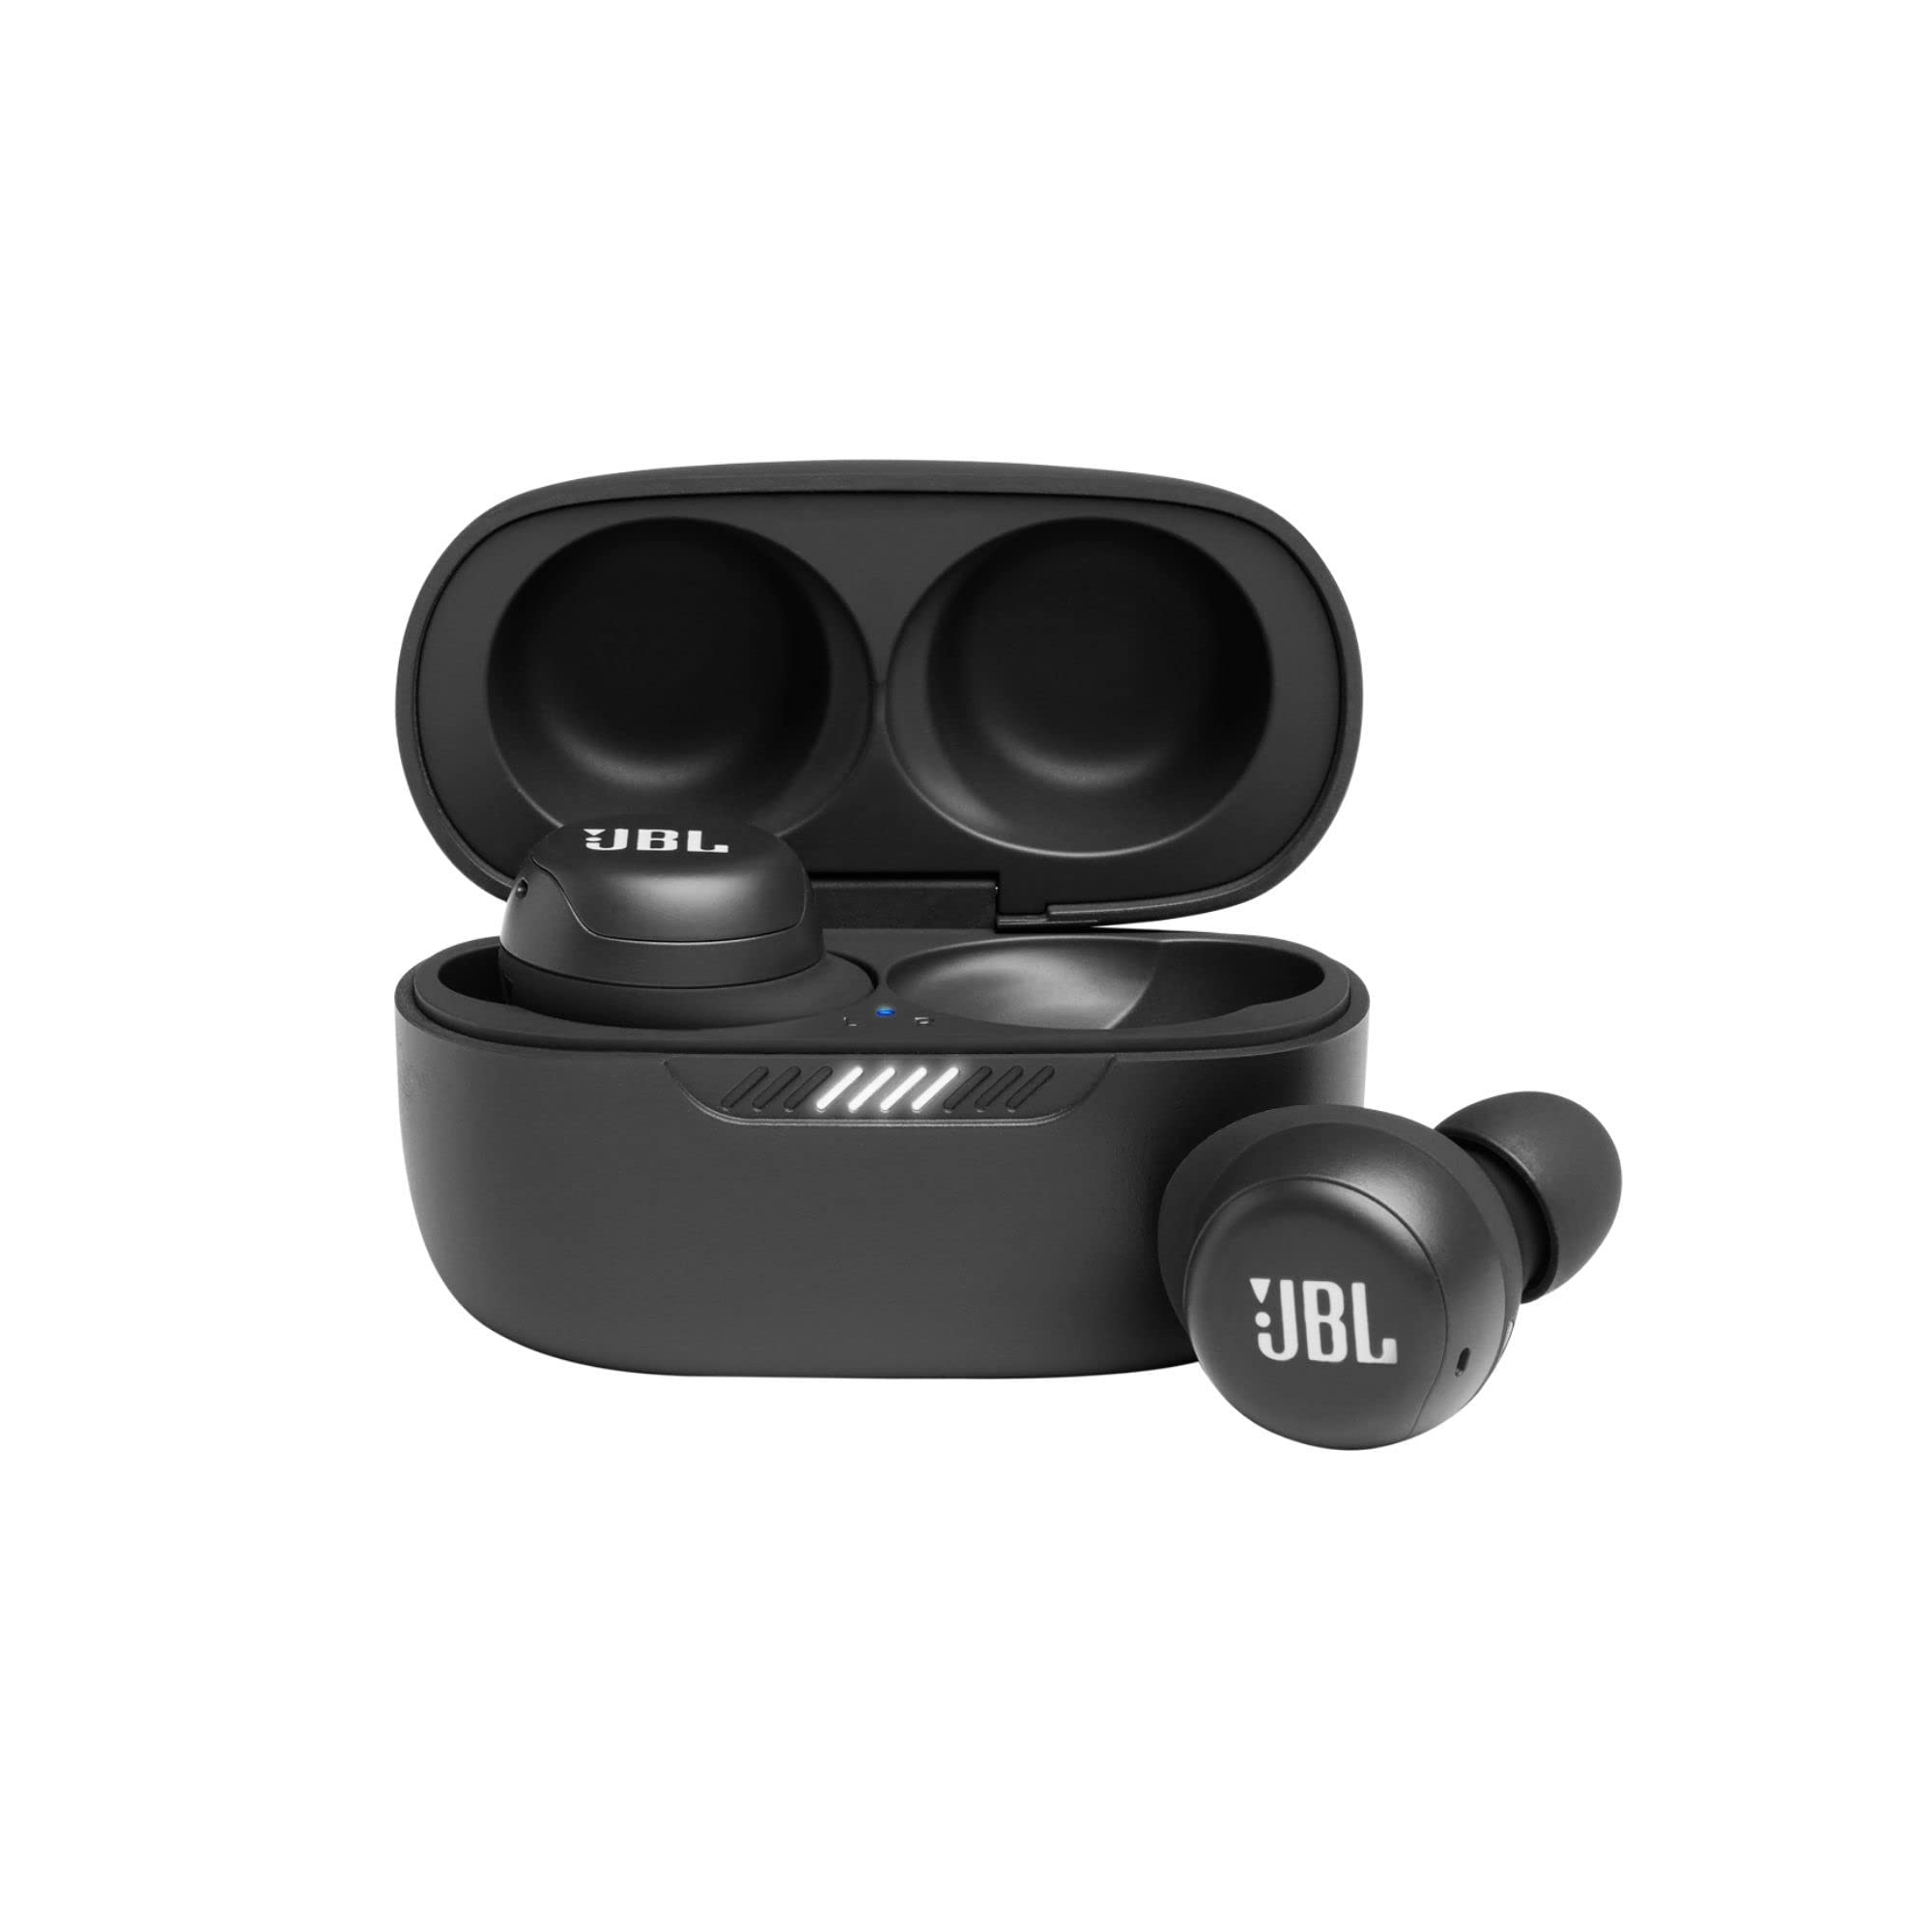 (NEW) JBL Live Free NC+ ANC Earbuds w/Wireless Charging - $39.95 - Free shipping for Prime members - $39.95